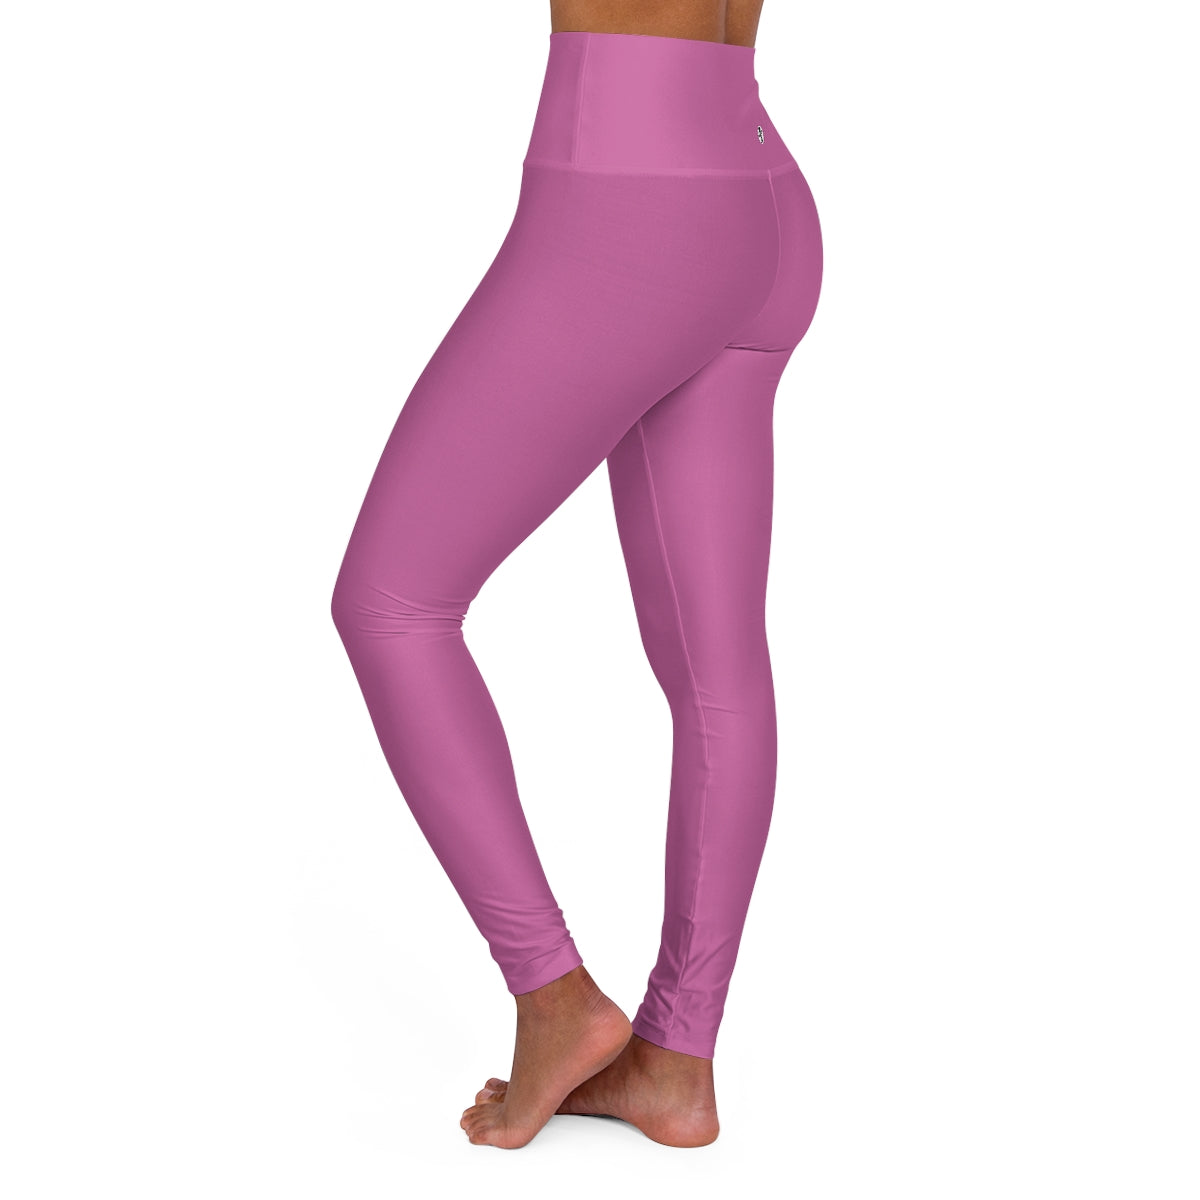 Kayannuo Yoga Pants Women Christmas Clearance Women's Pure Color  Hip-lifting Sports Fitness Running High-waist Yoga Pants Pink